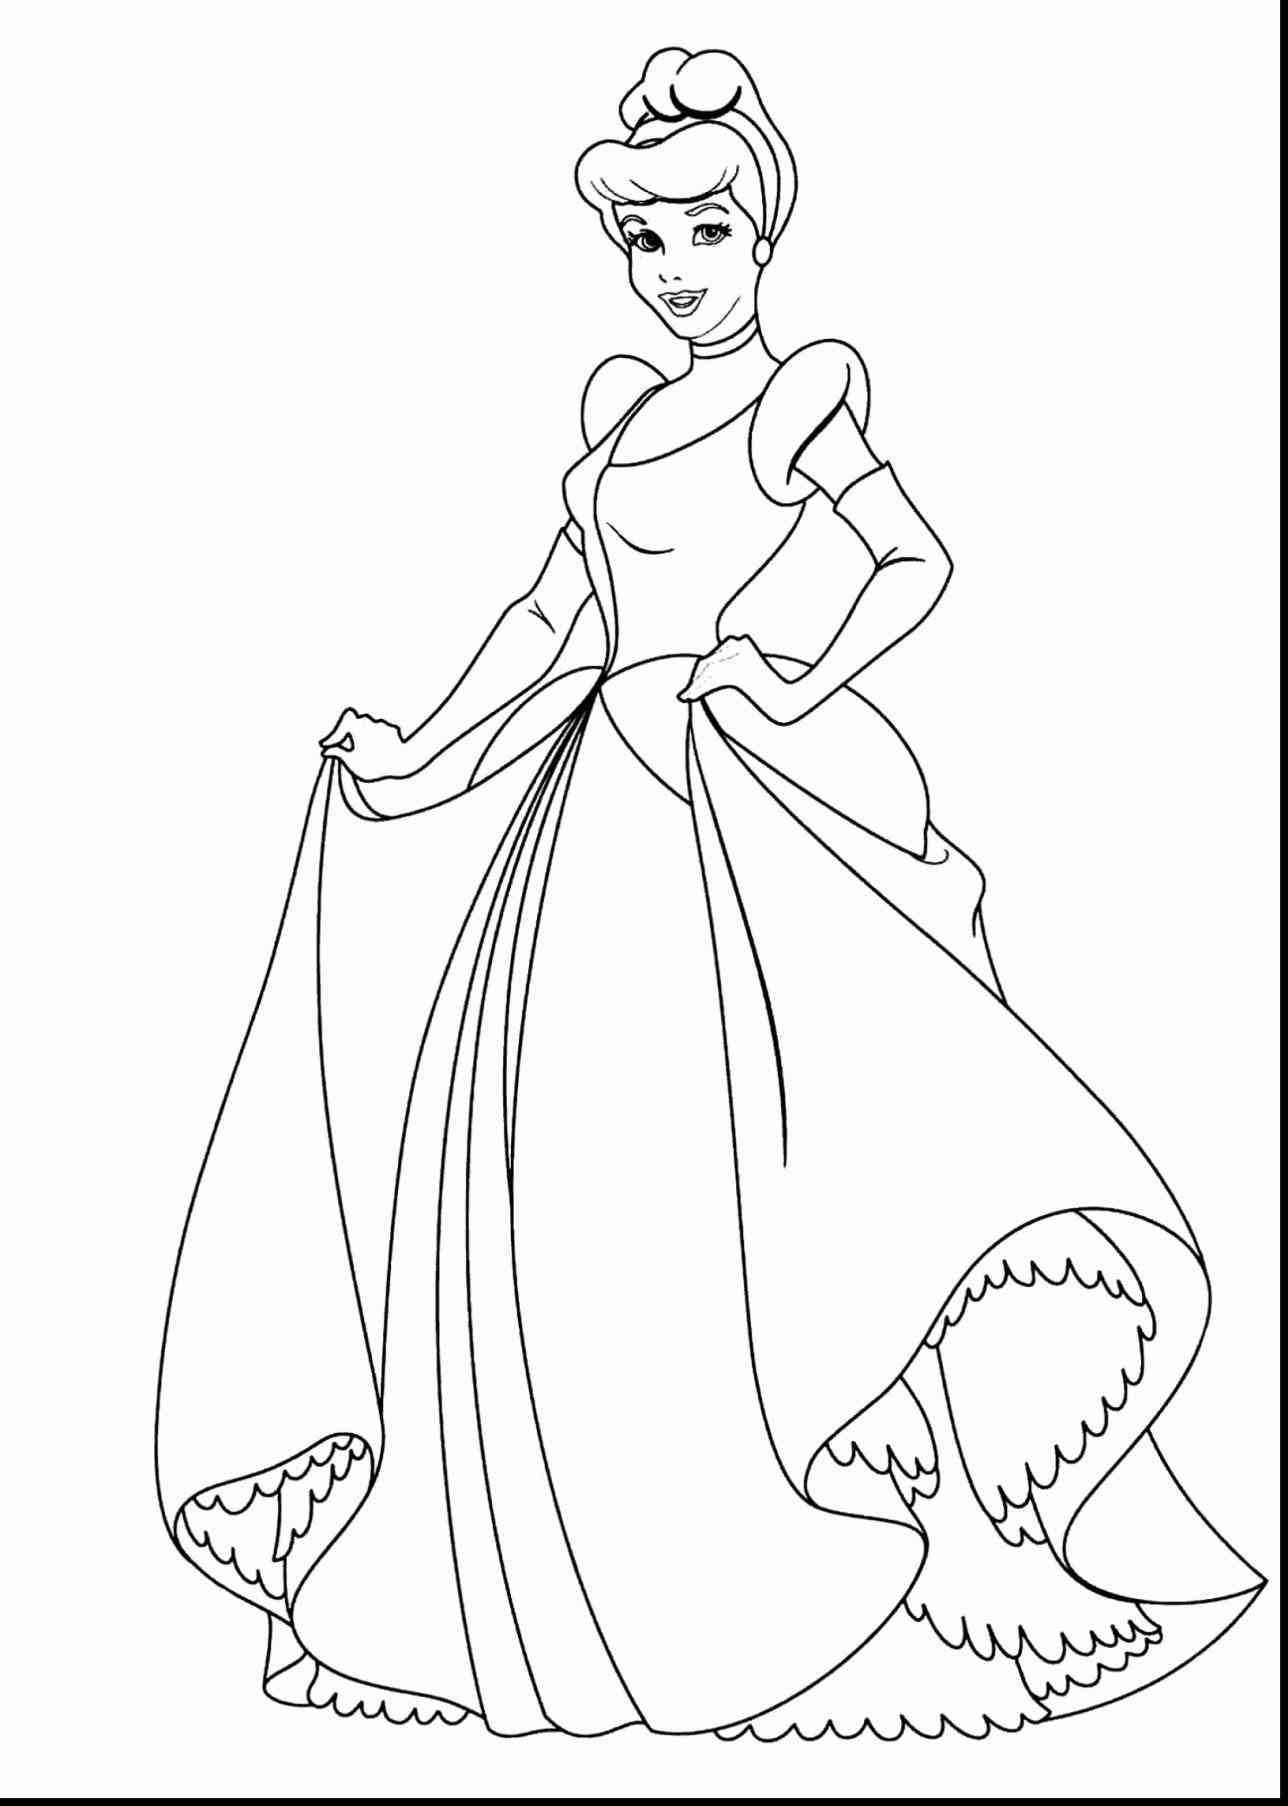 Top How To Draw Cinderella  The ultimate guide 